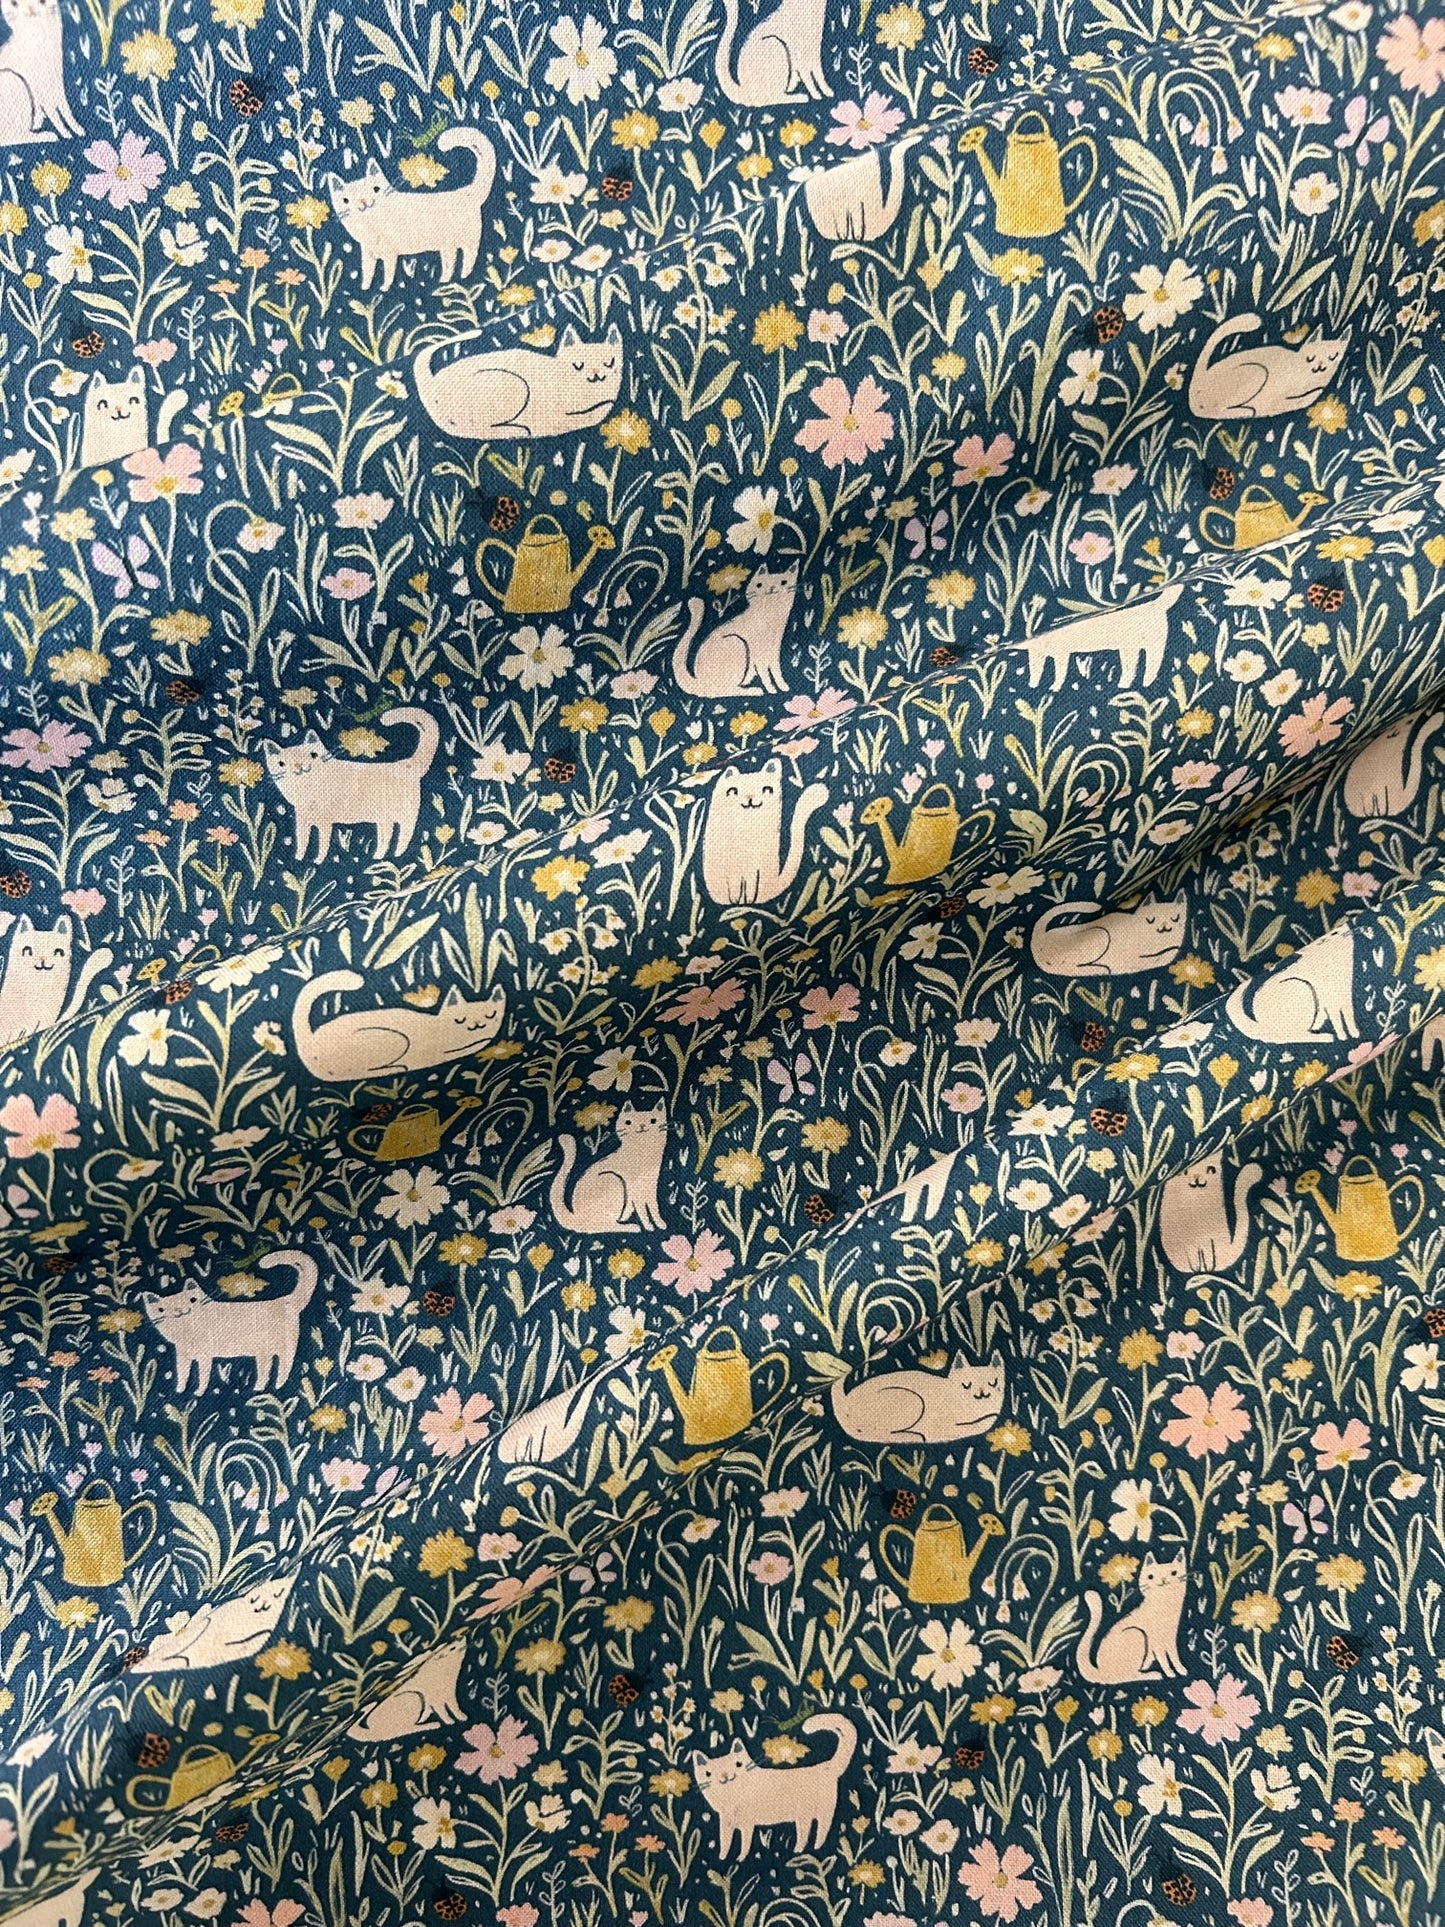 a close up of the fabric showing the pring of cats in fields of flowers